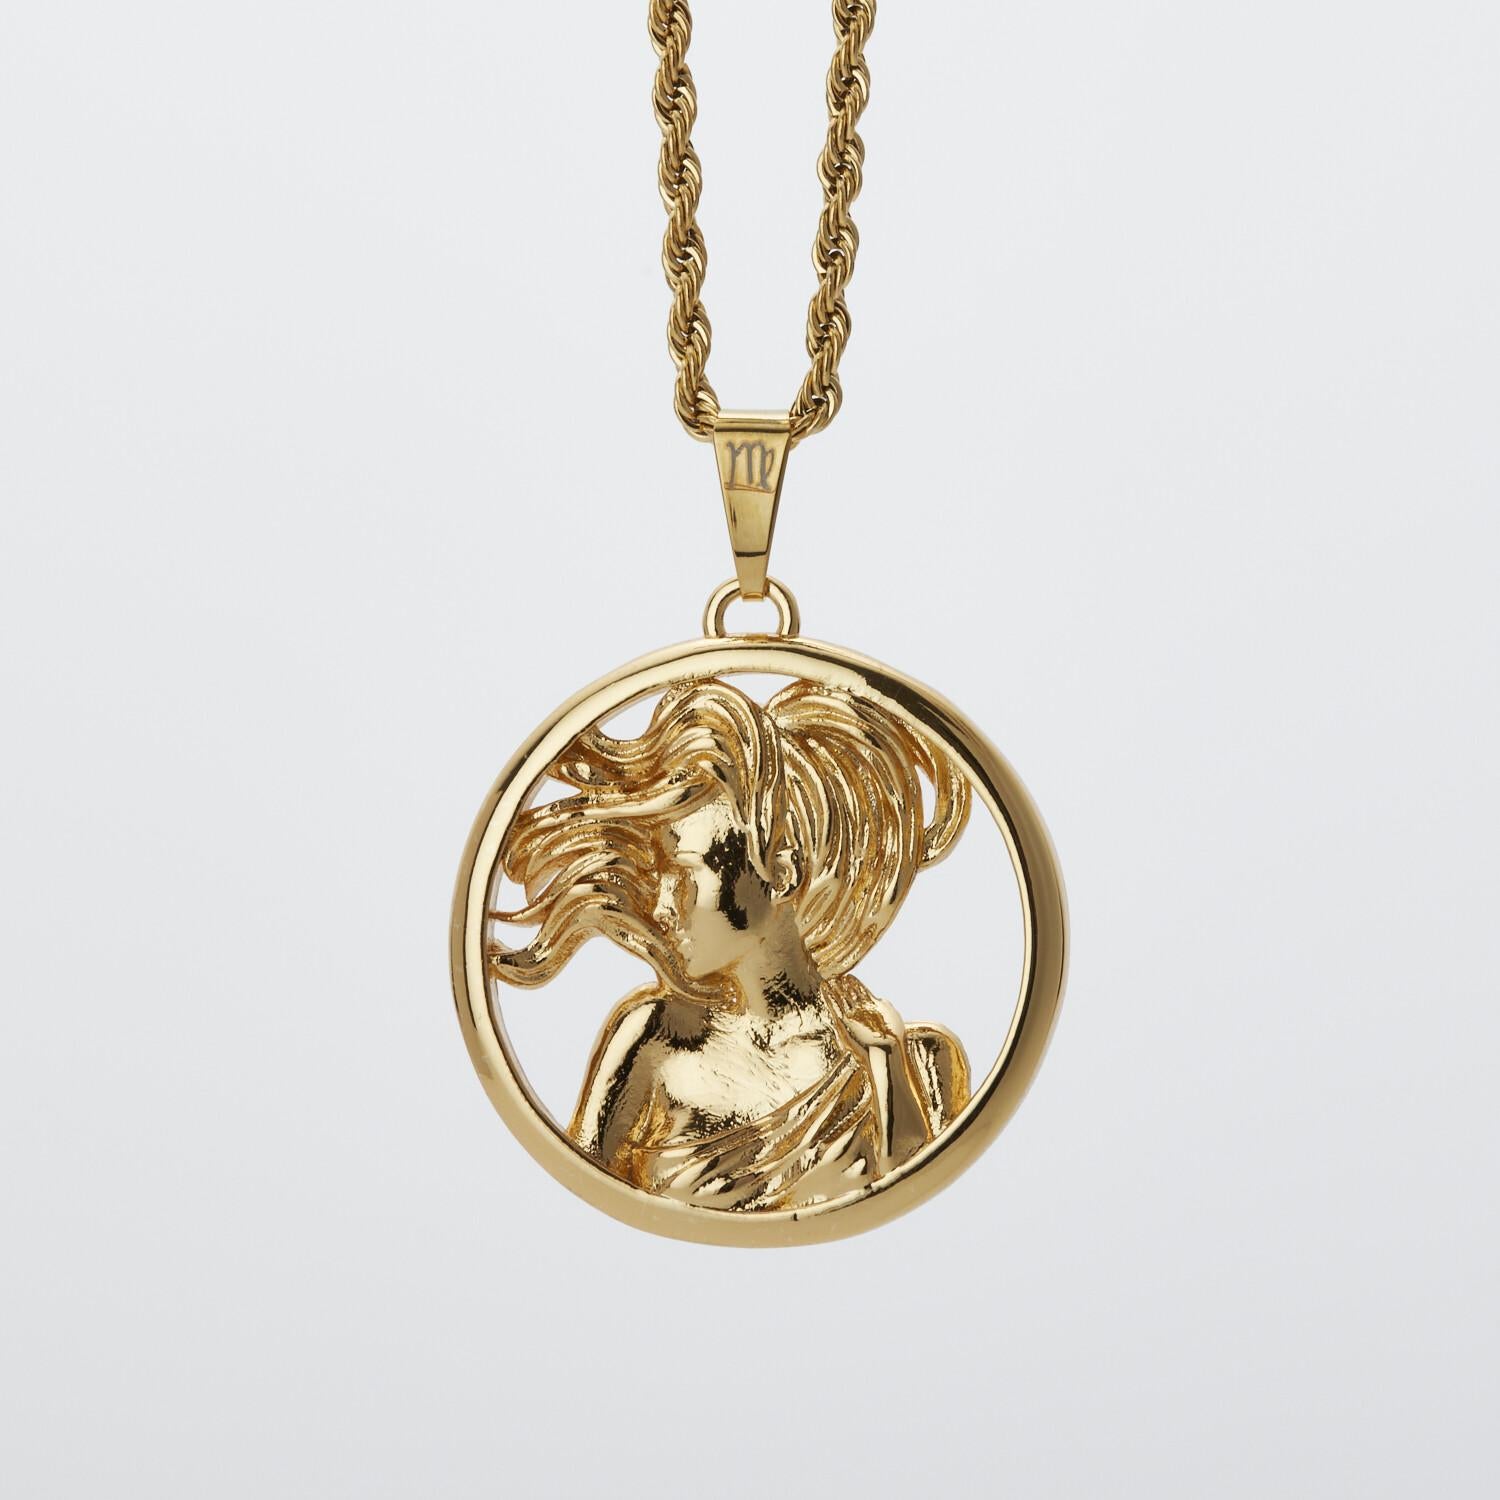 Eternally Virgo (August 23- September 22) 

The Eternal Zodiac “Virgo” Pendant features the symbol of the Virgin. Virgo is an earth Sign and ruled by the planet Mercury. Those born under this sign are often very independent and down-to-earth with a